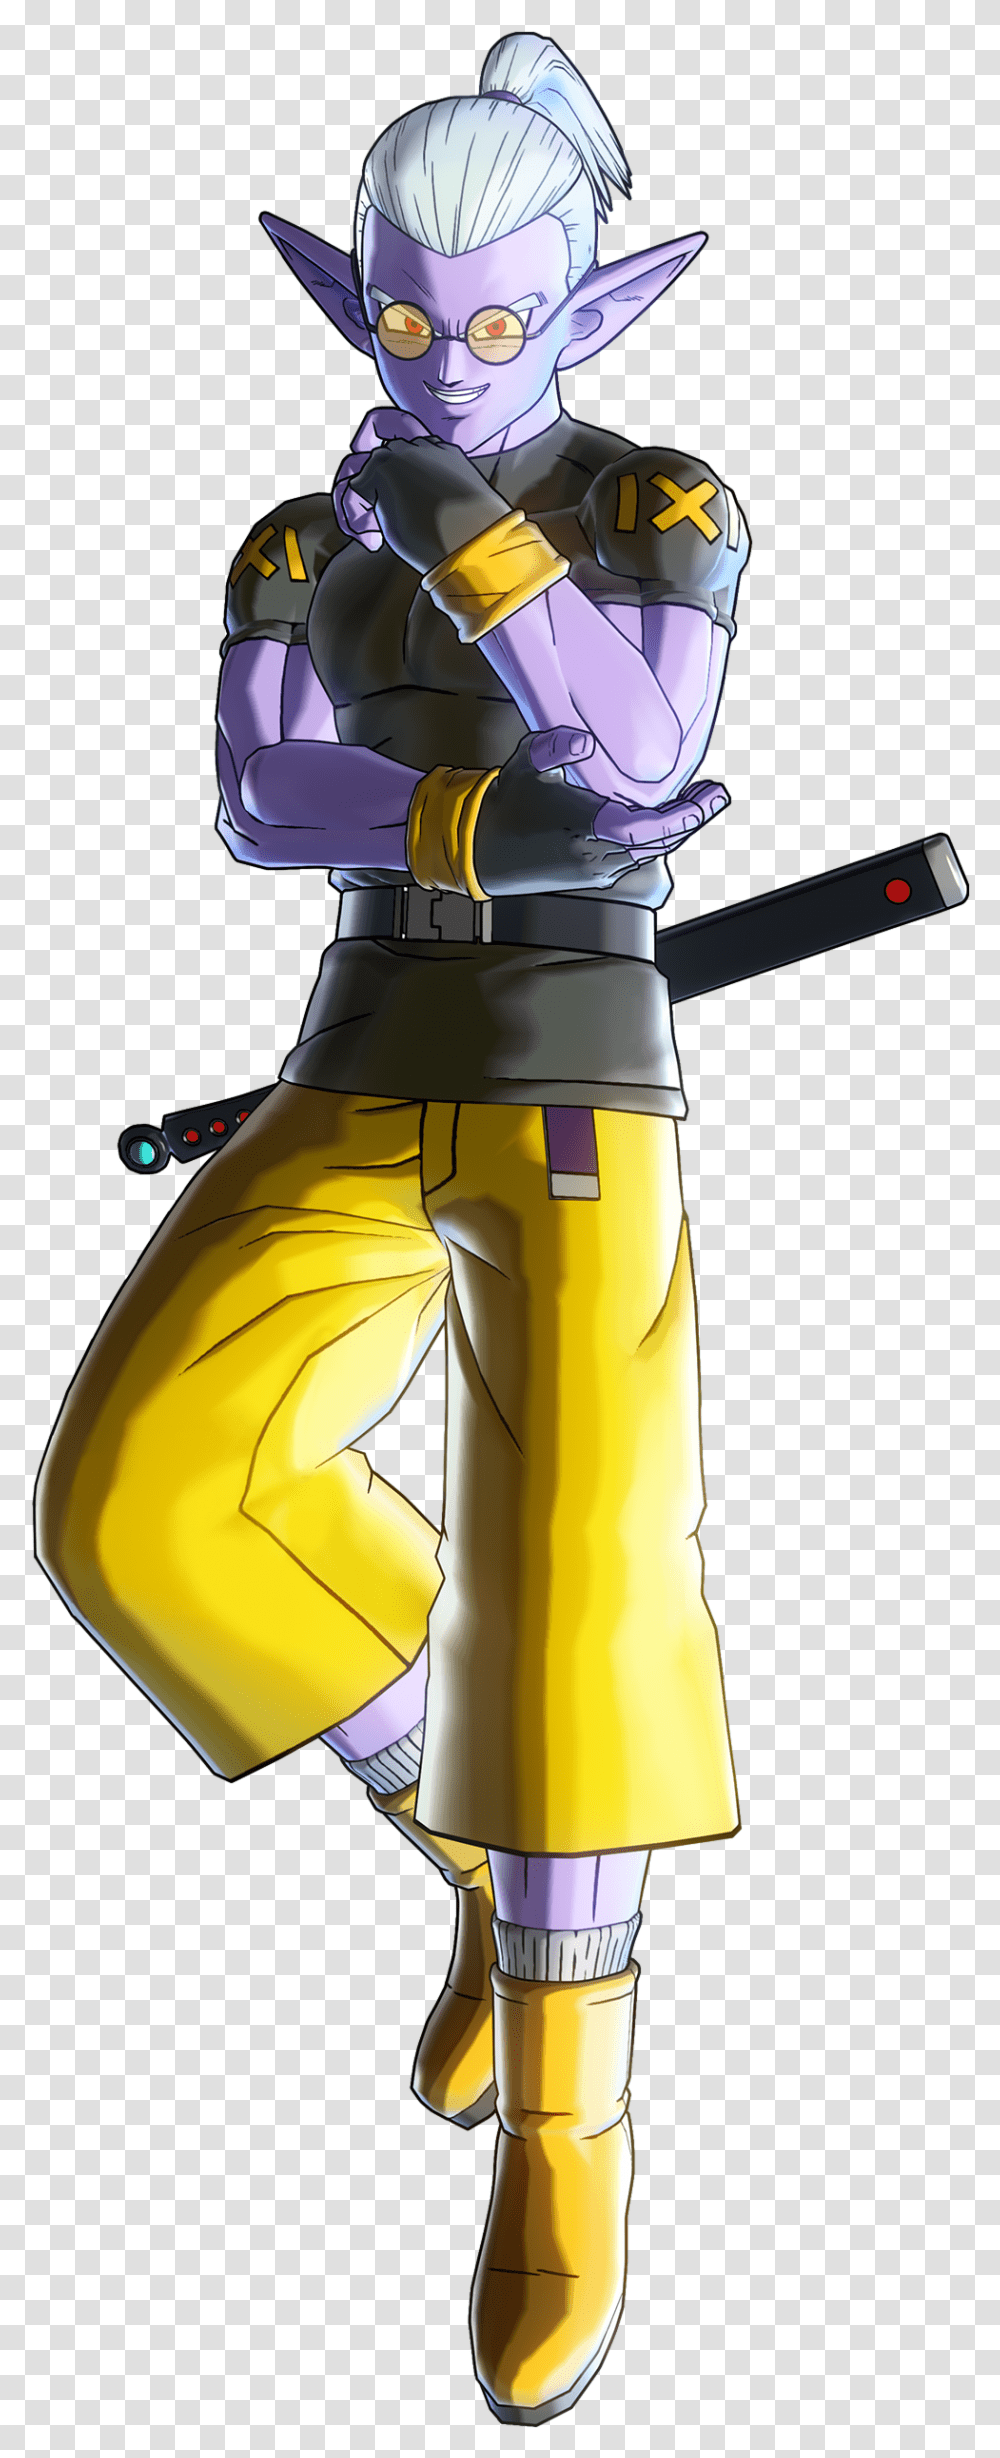 Dragon Ball Xenoverse 2 Gets Details Dragon Ball Xenoverse 2 Fu, Toy, Bottle, Beverage, Alcohol Transparent Png